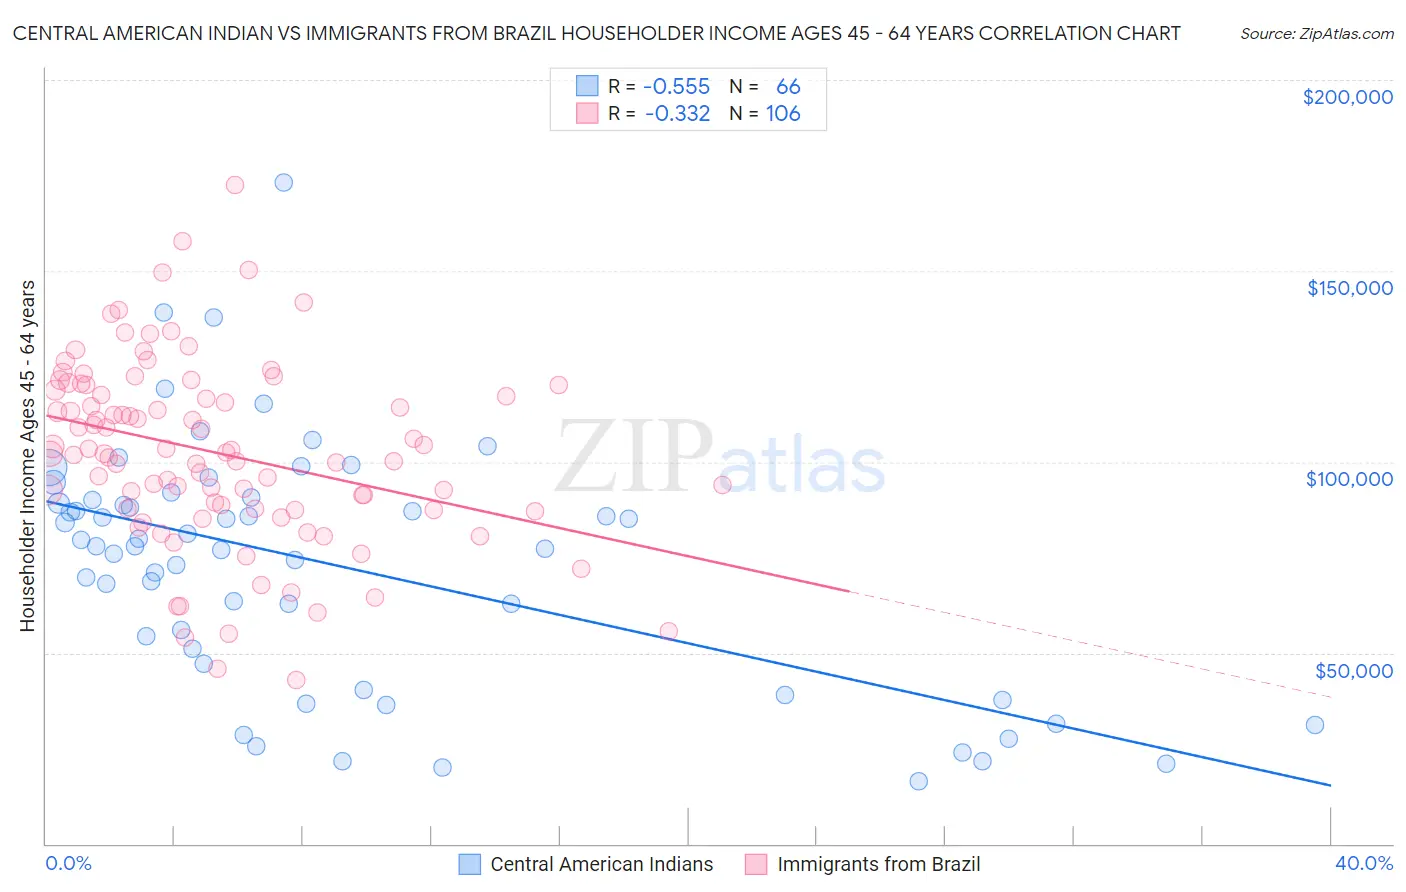 Central American Indian vs Immigrants from Brazil Householder Income Ages 45 - 64 years